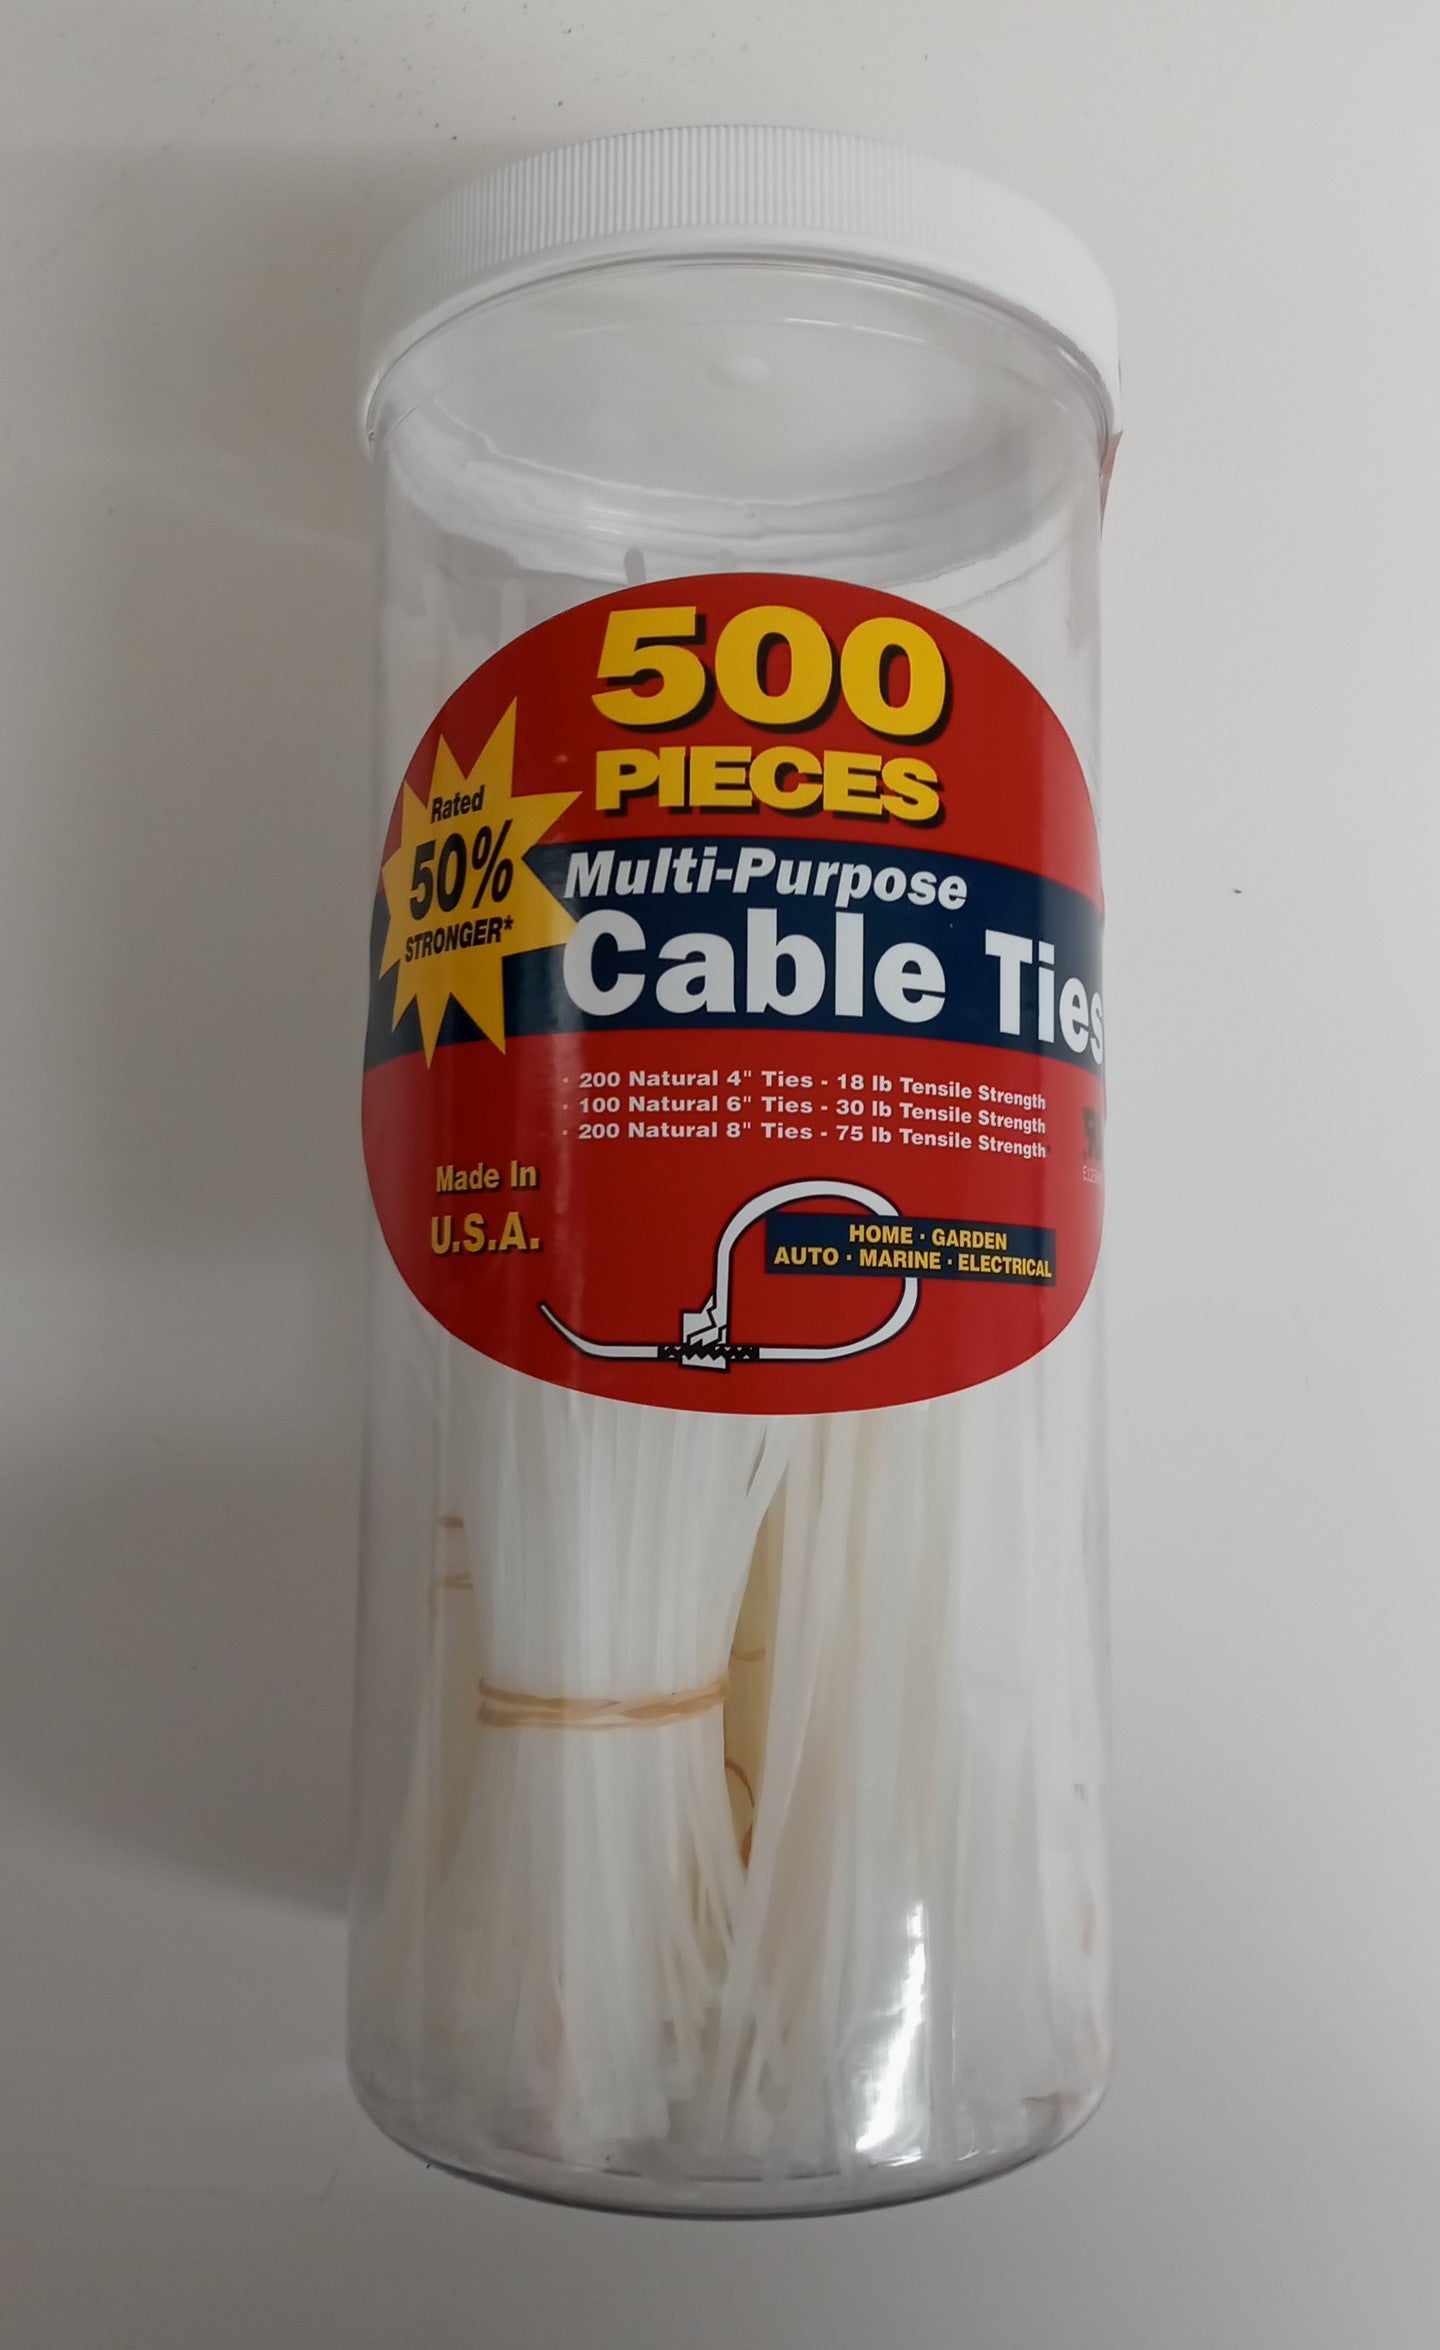 50098 Multi Purpose Assorted Cable Ties 500-Count